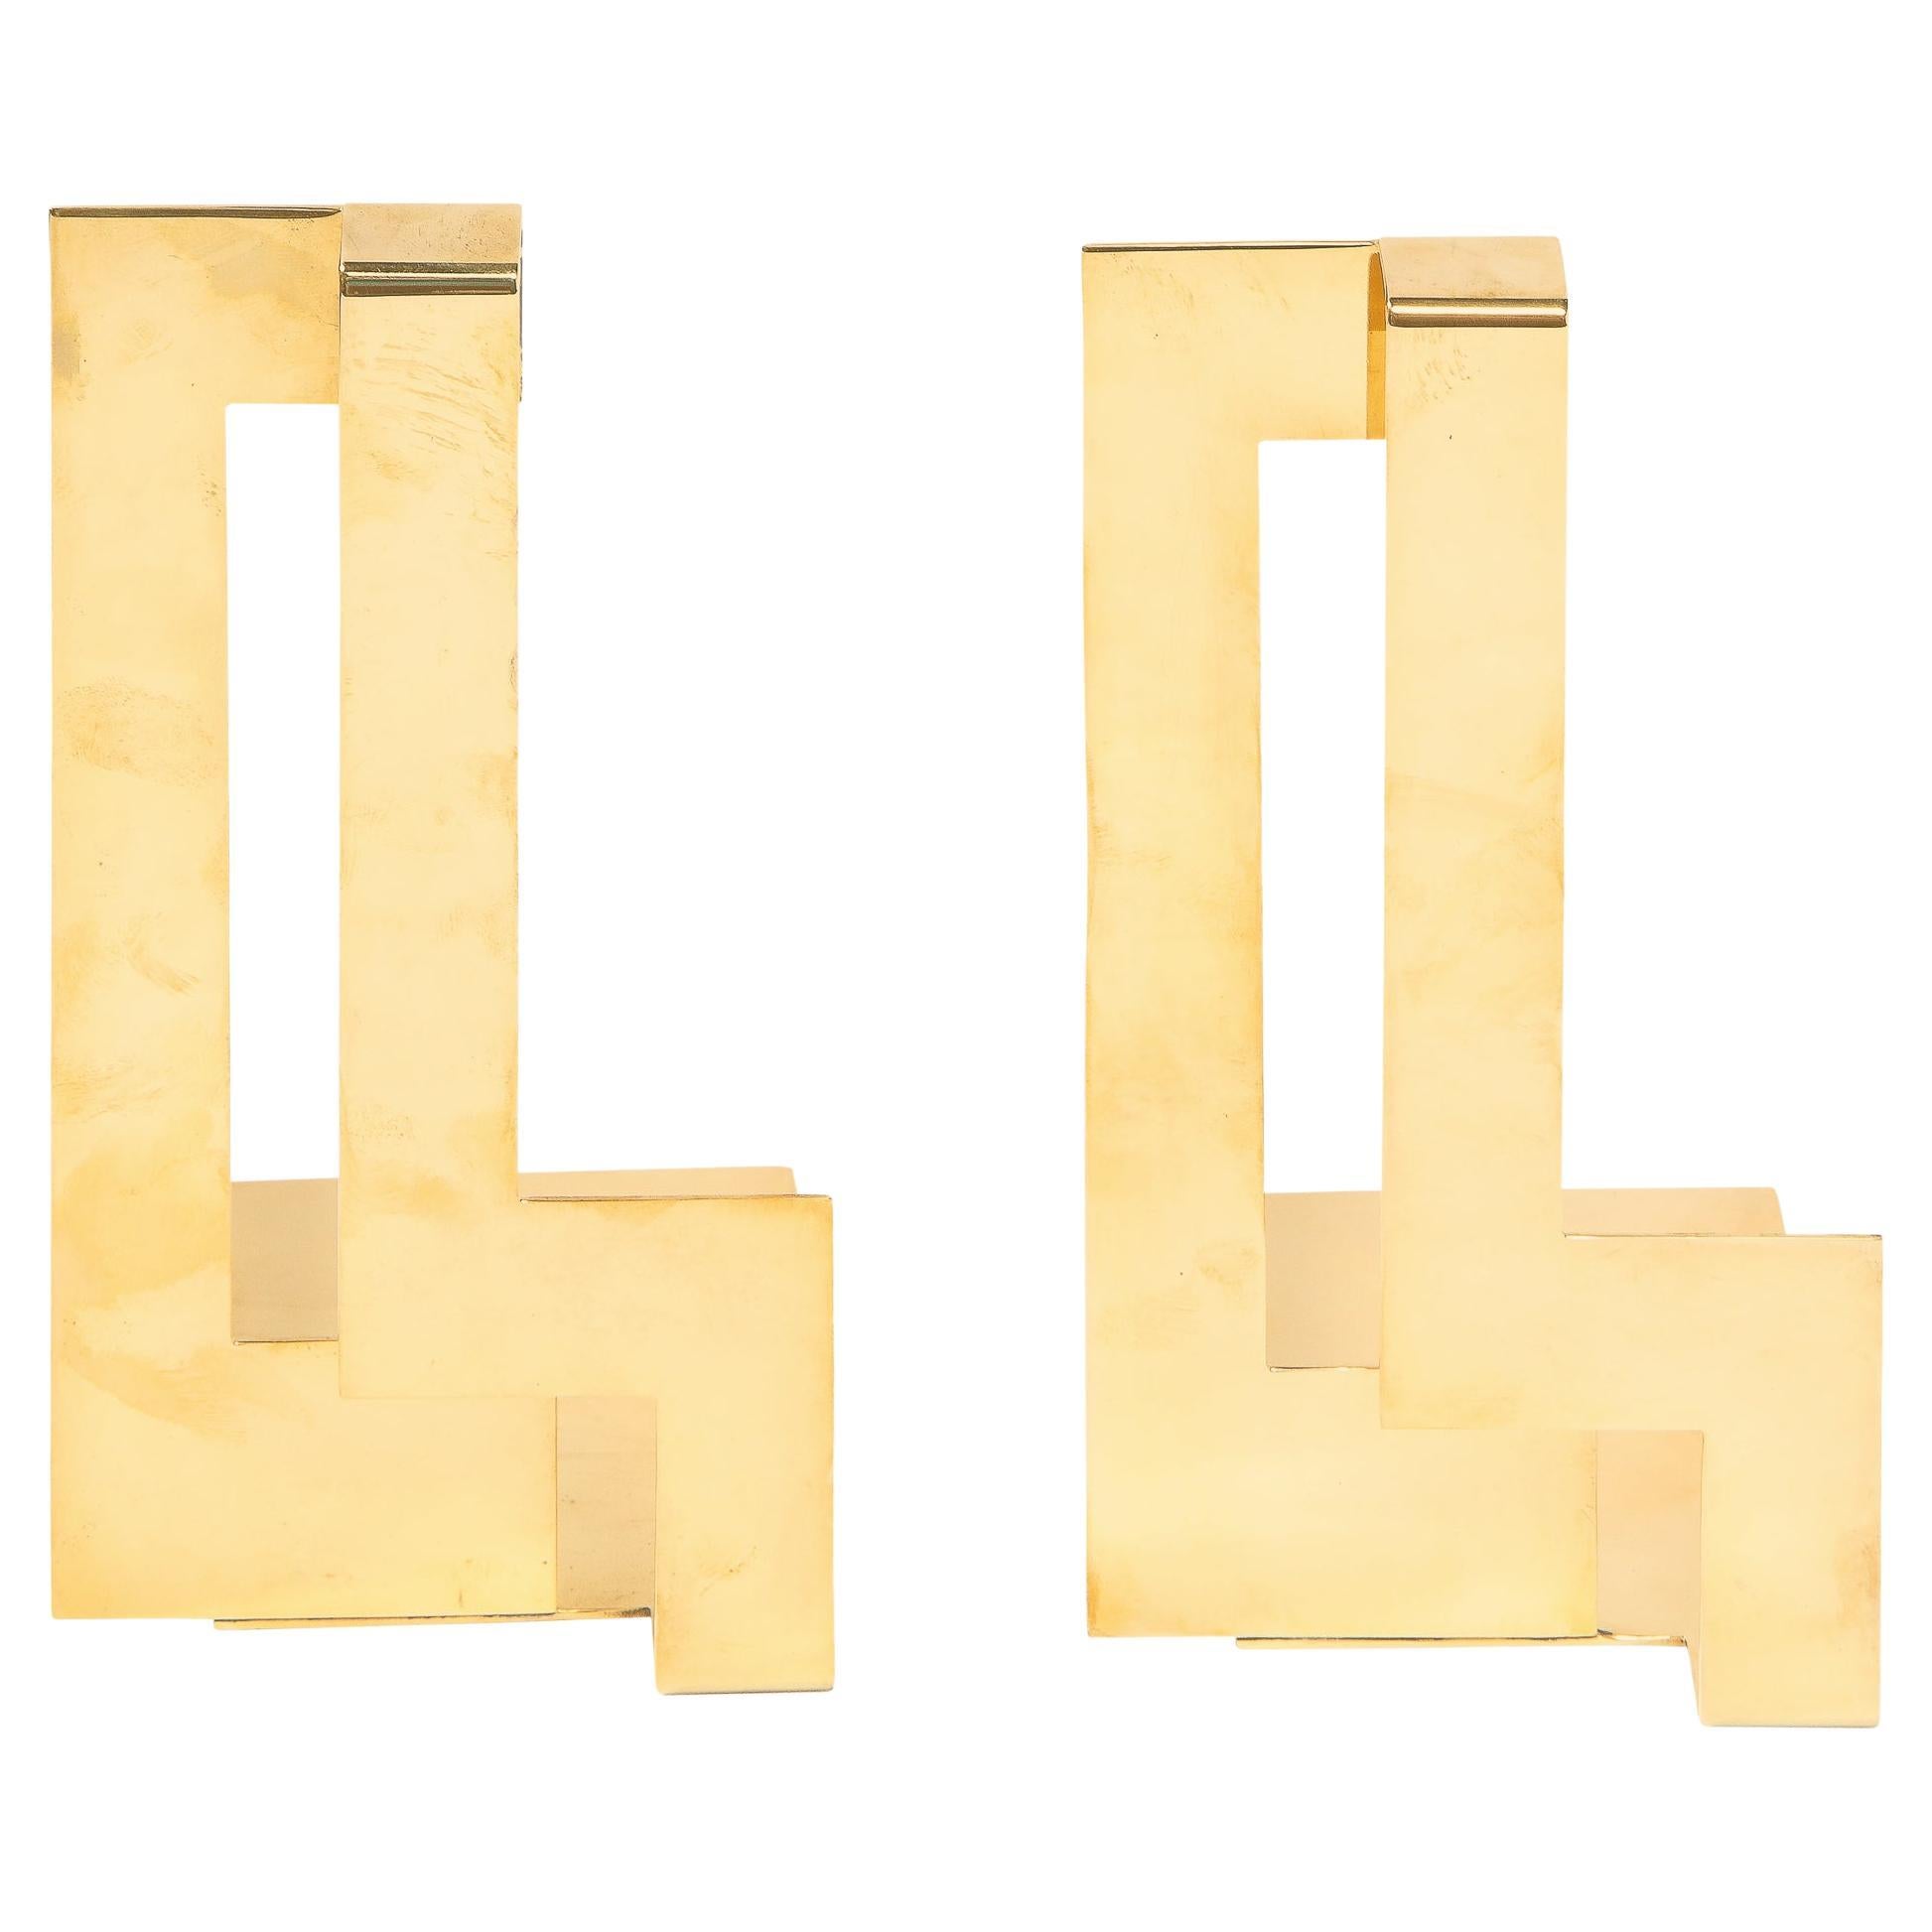 Pair of Scandinavian Modernist Polished Brass Rectilinear Bookends by Skultana For Sale